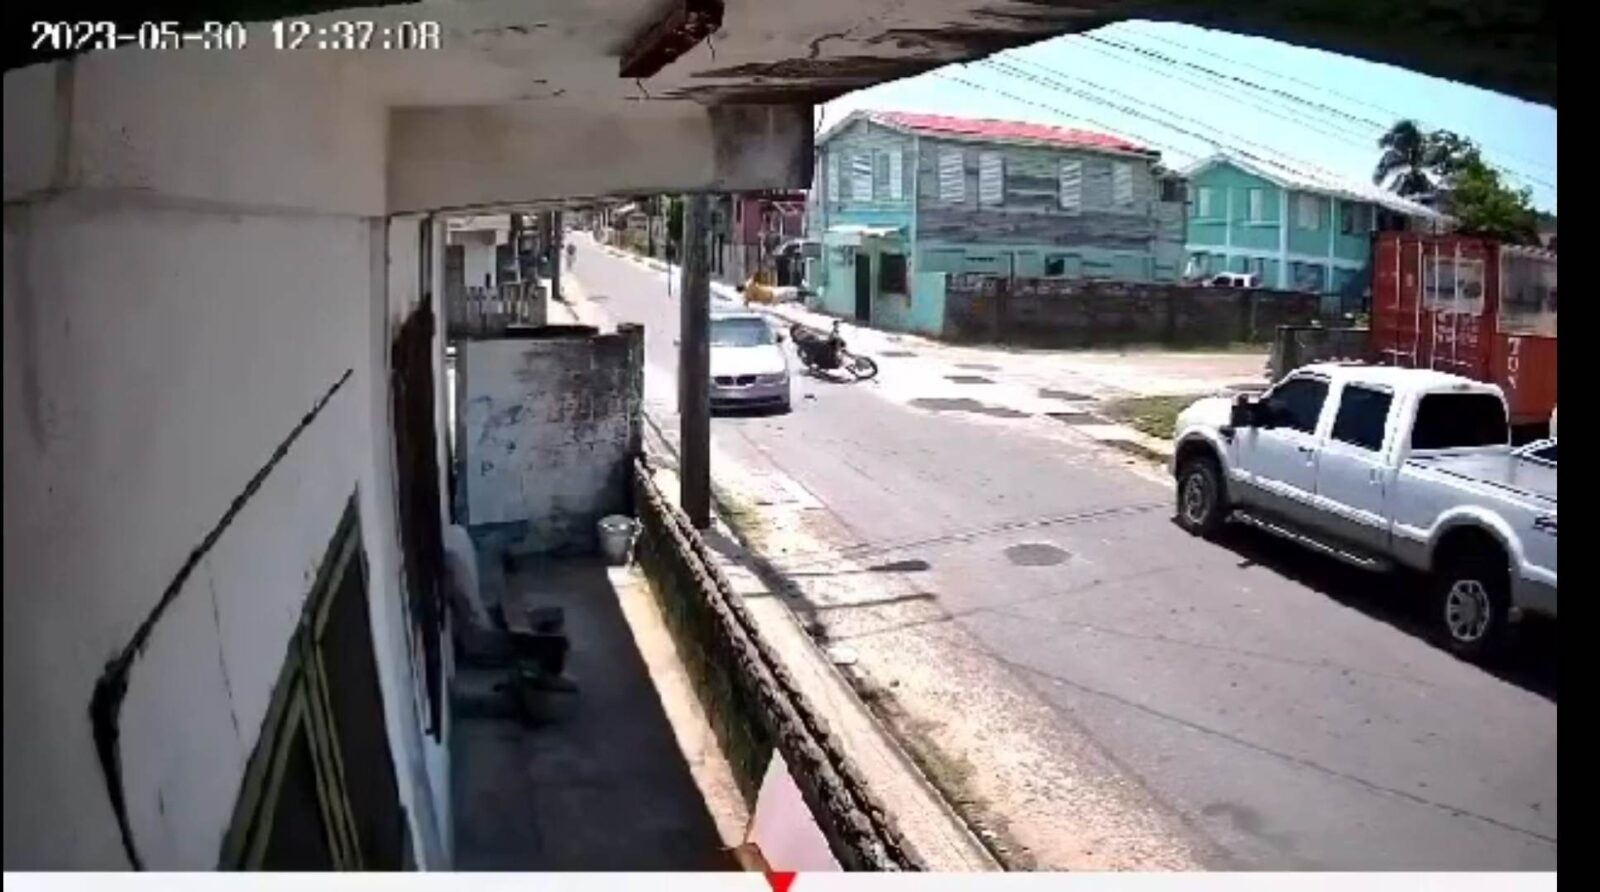 Motorcyclist crashes into car in Belize City